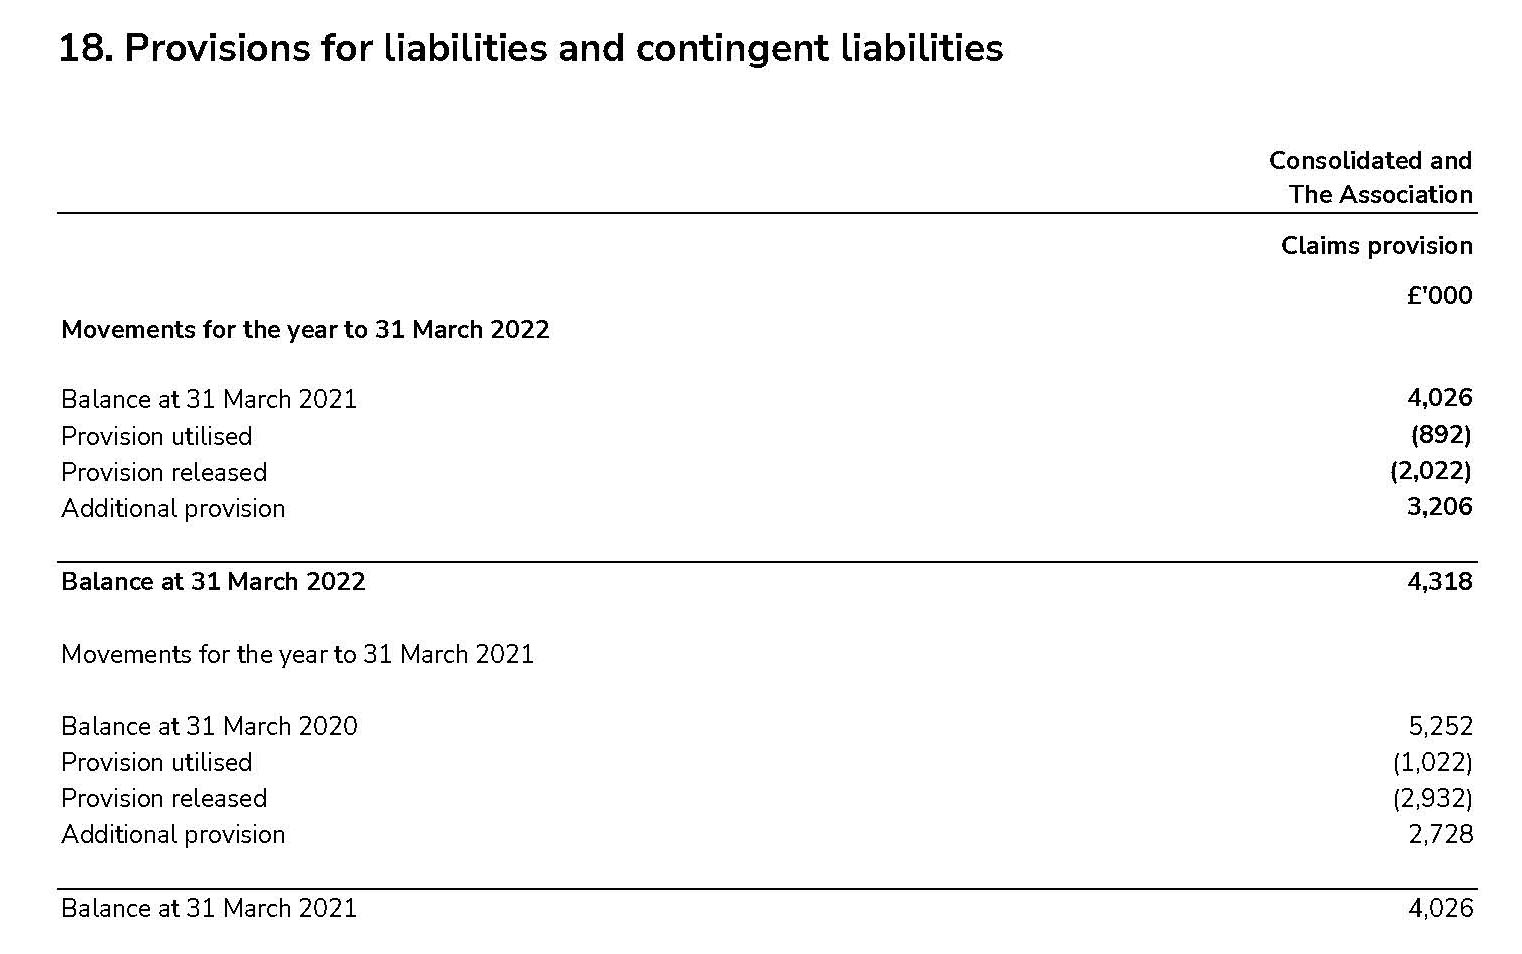 Tables showing Scouts' provisions for liabilities and contingent liabilities for 2021-22